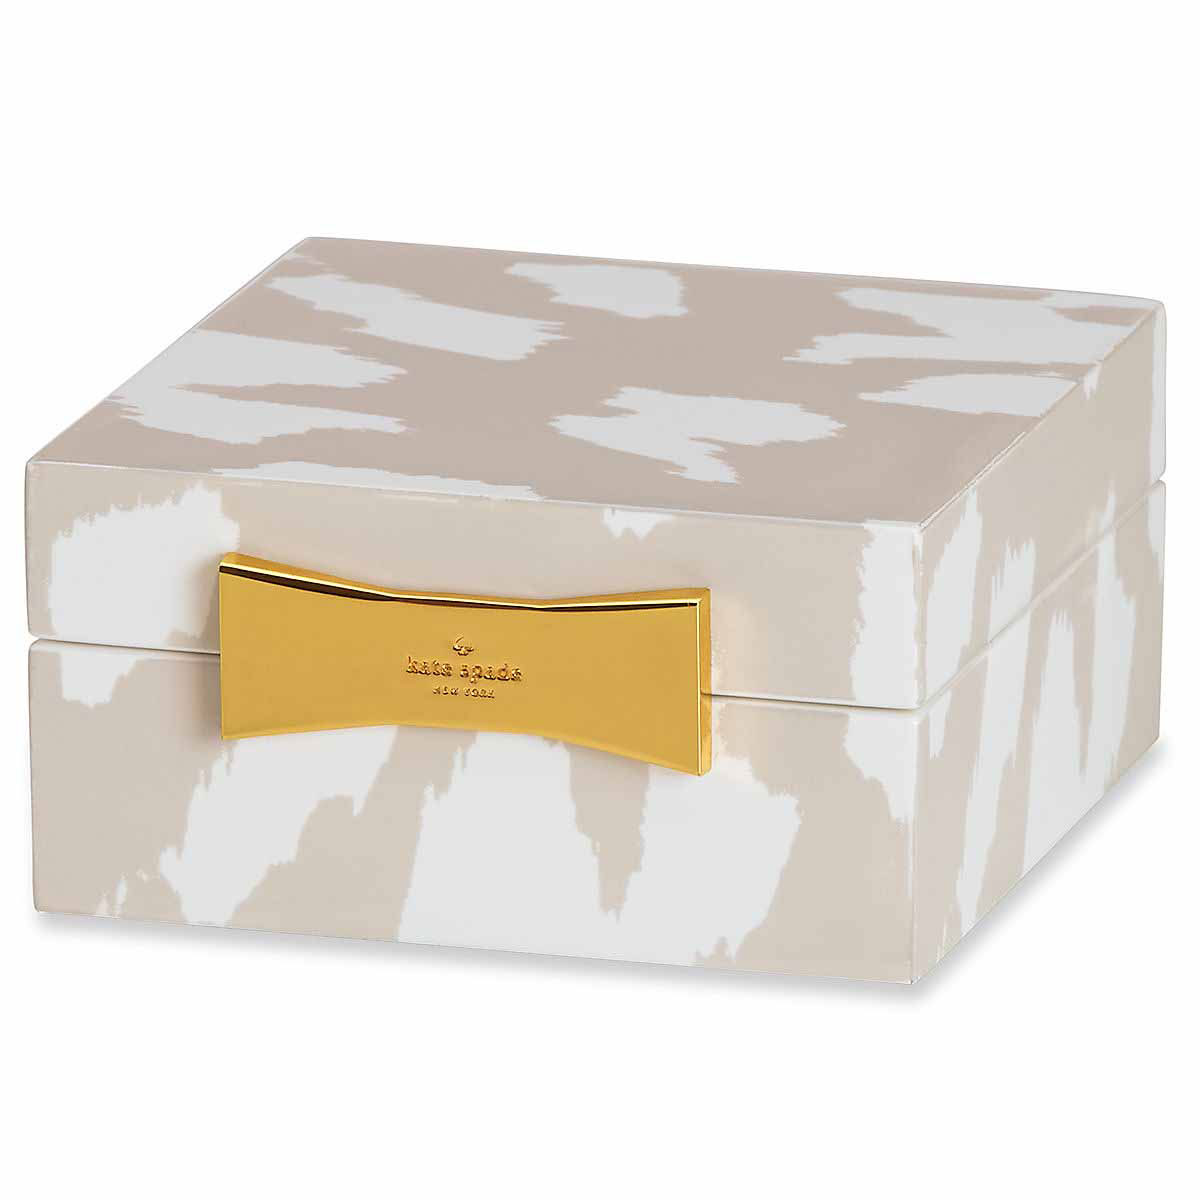 Kate Spade New York, Lenox Outpost Gifting Square Jewelry Box, Animal